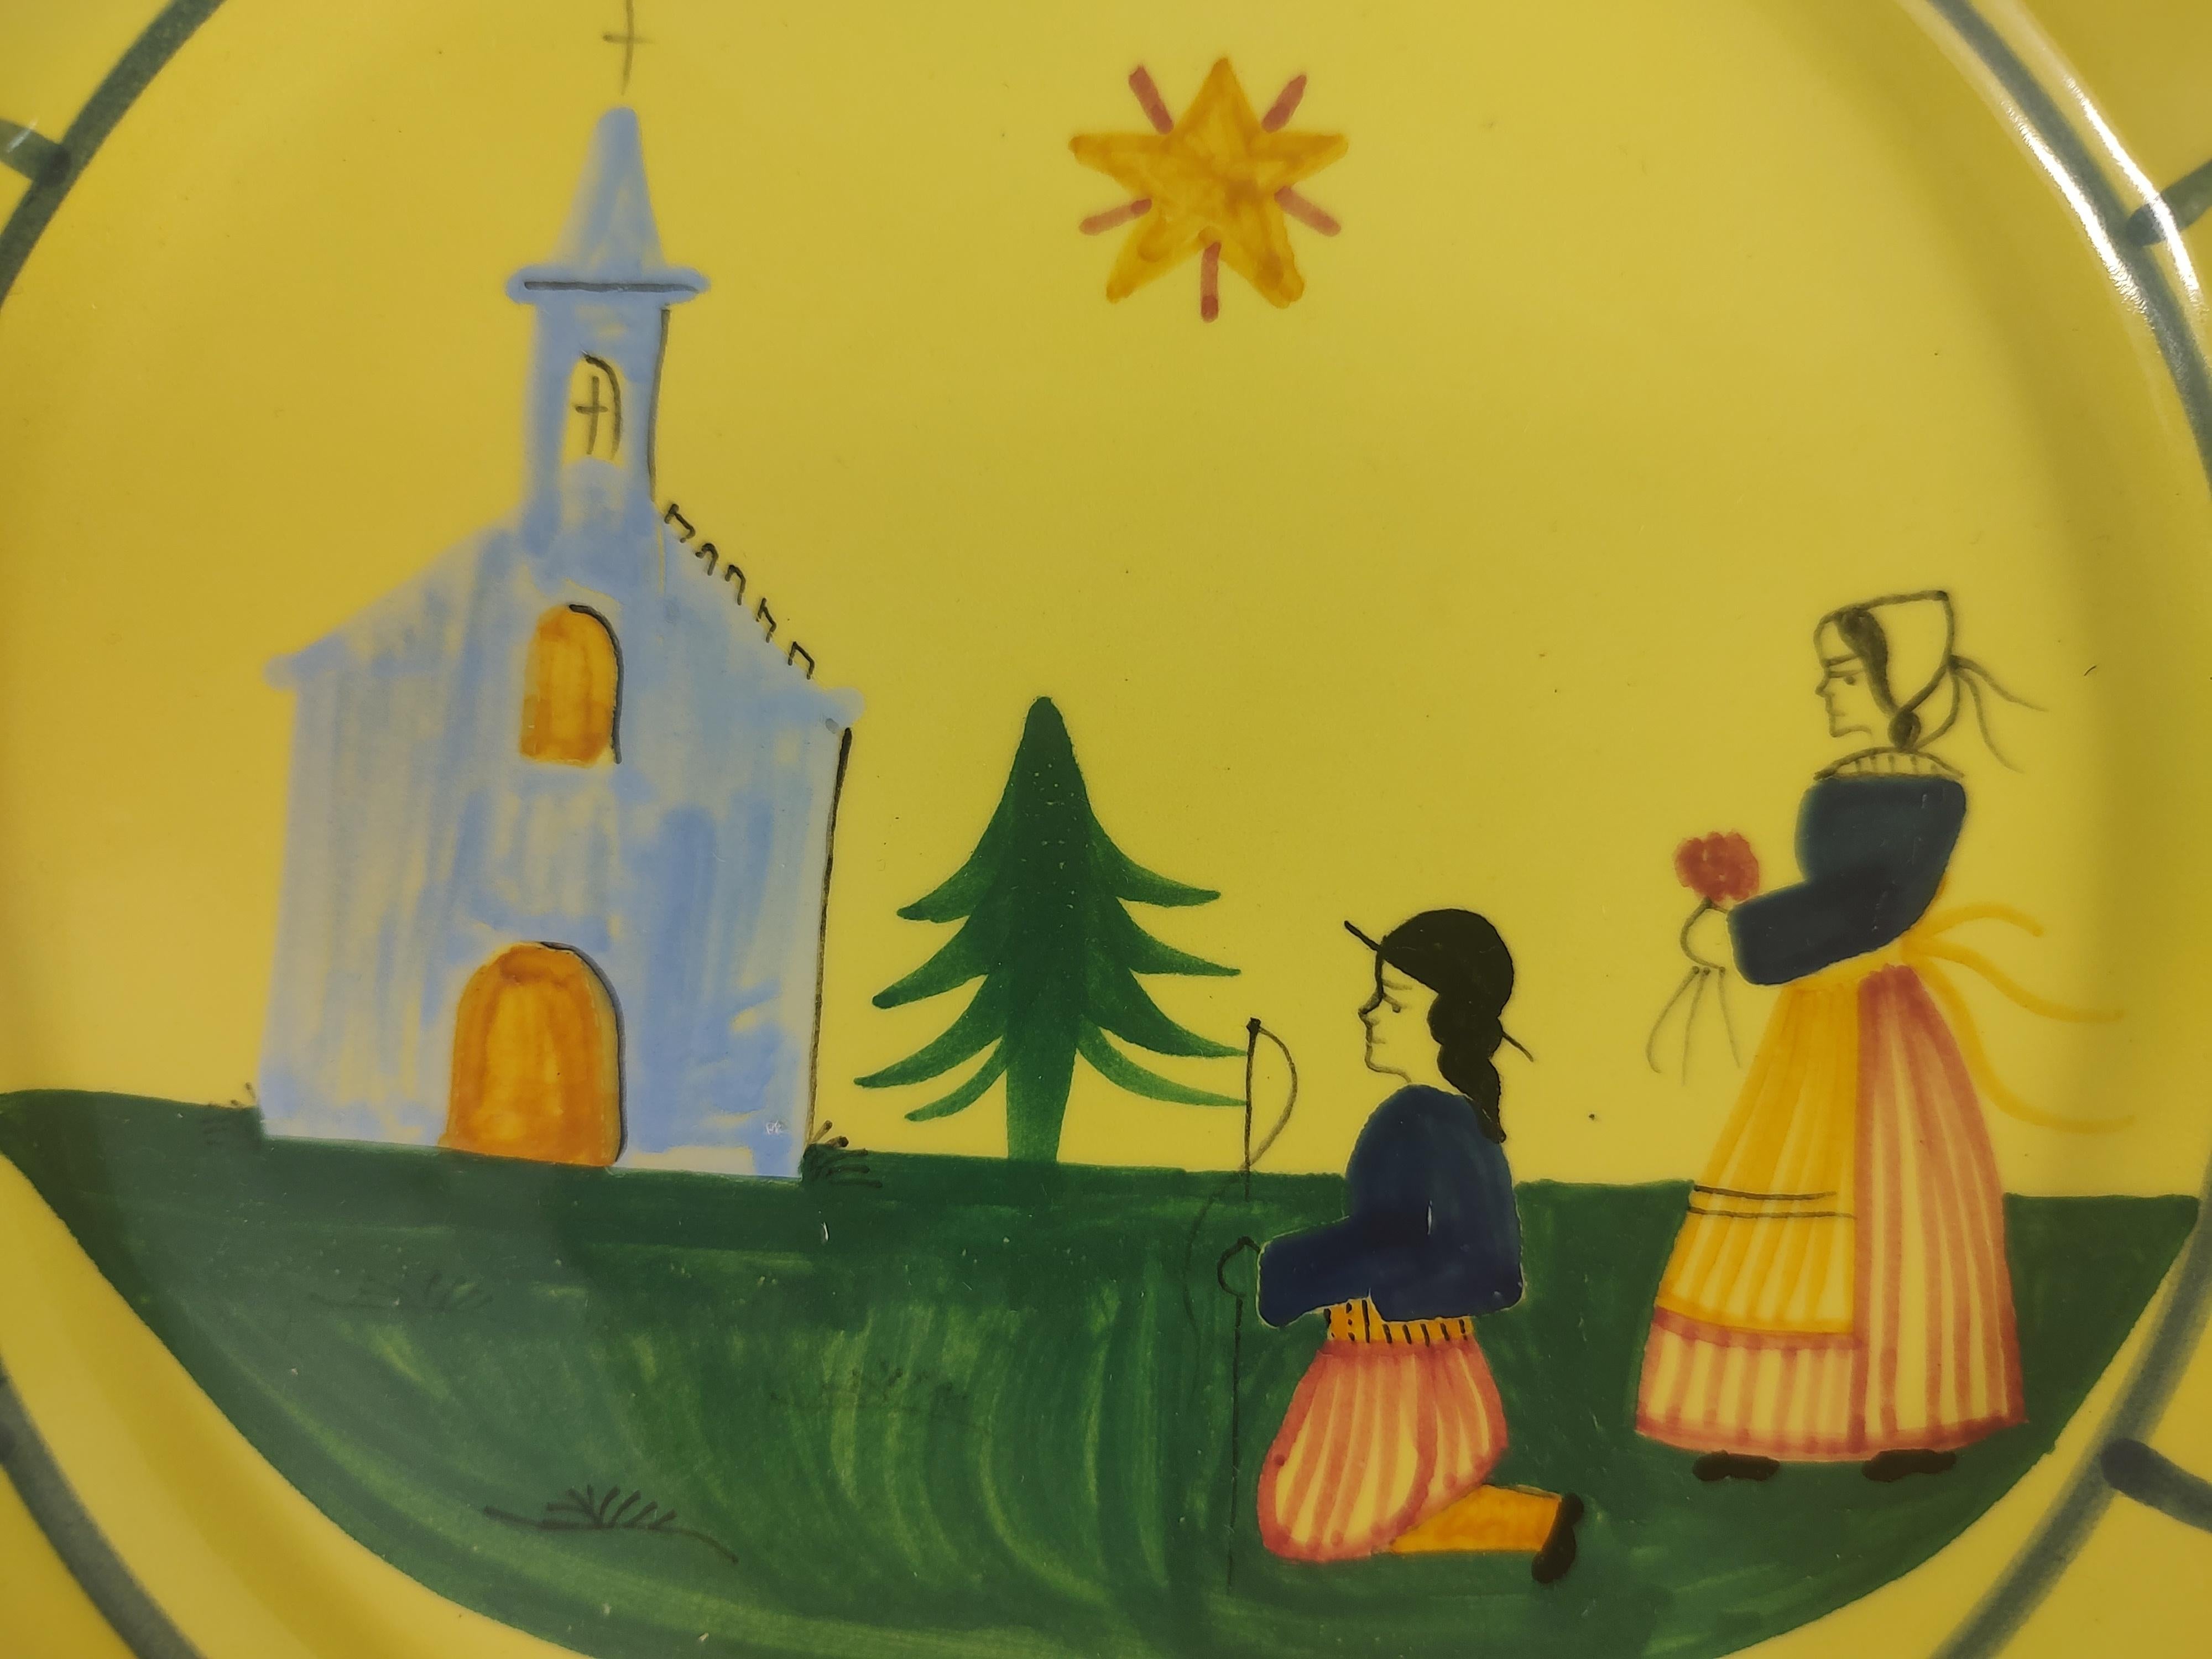 Glazed Quimper Noel 1982 Christmas Plate with Breton Peasant Figures in a Spiritual Set For Sale